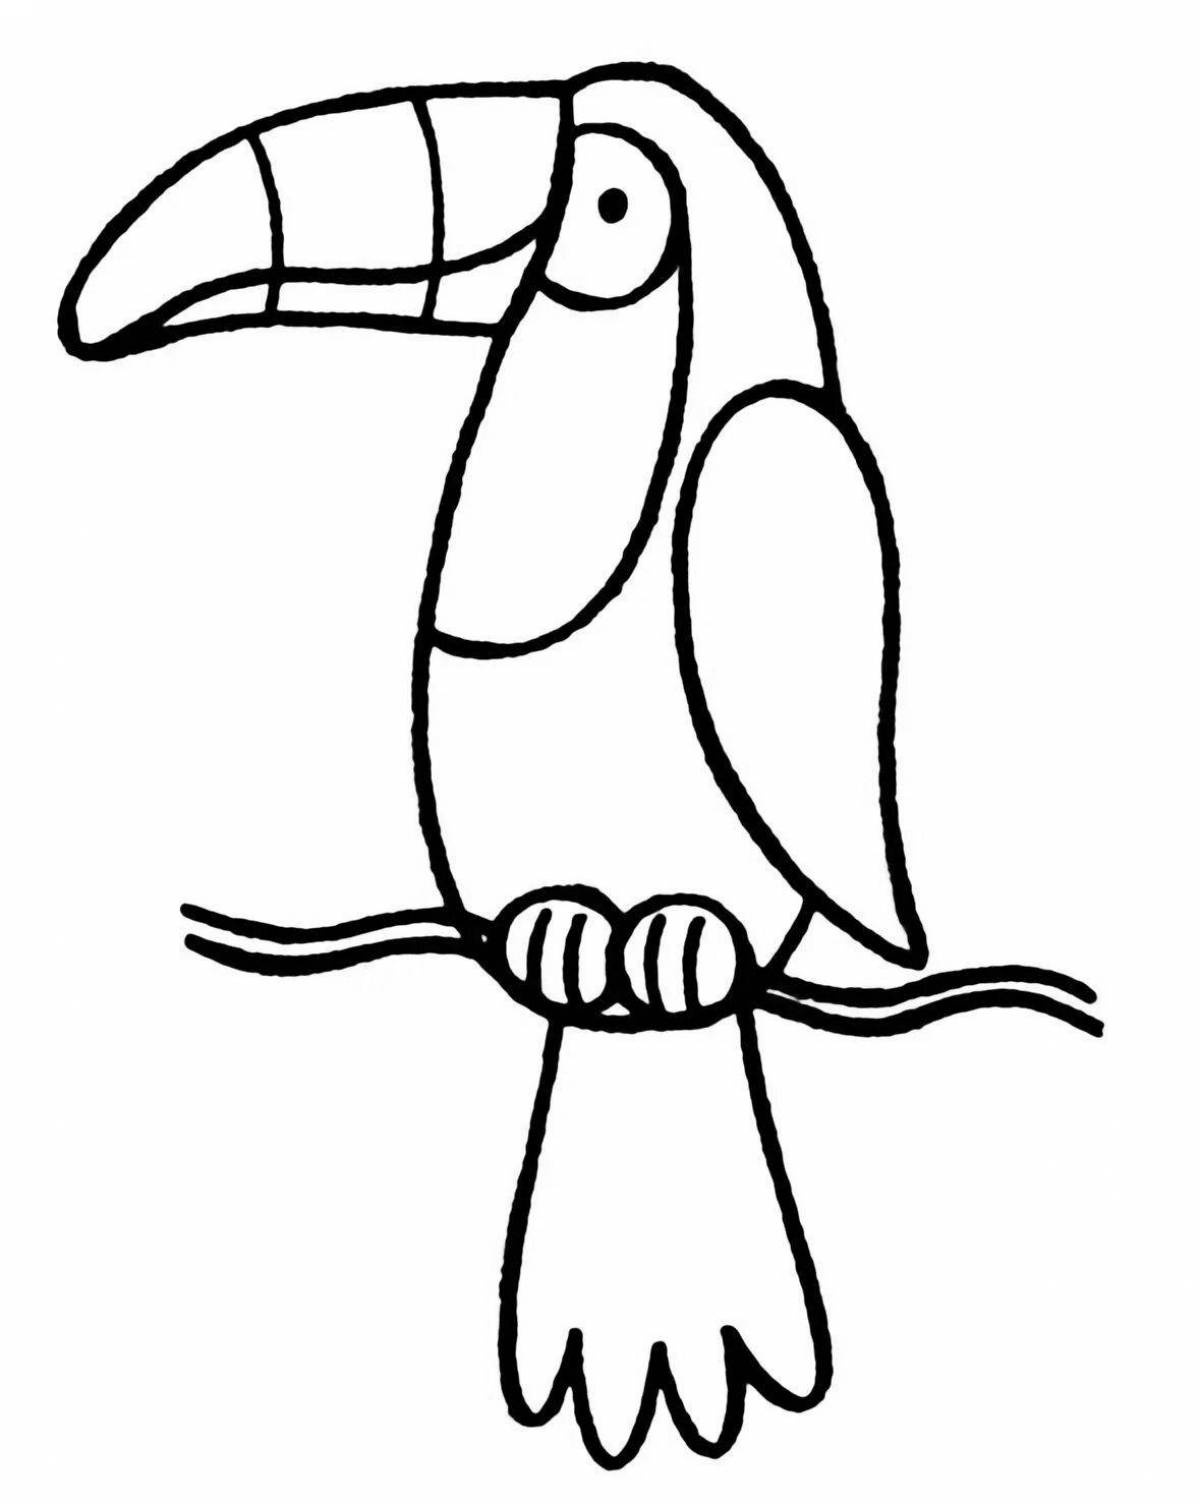 Children's toucan coloring pages